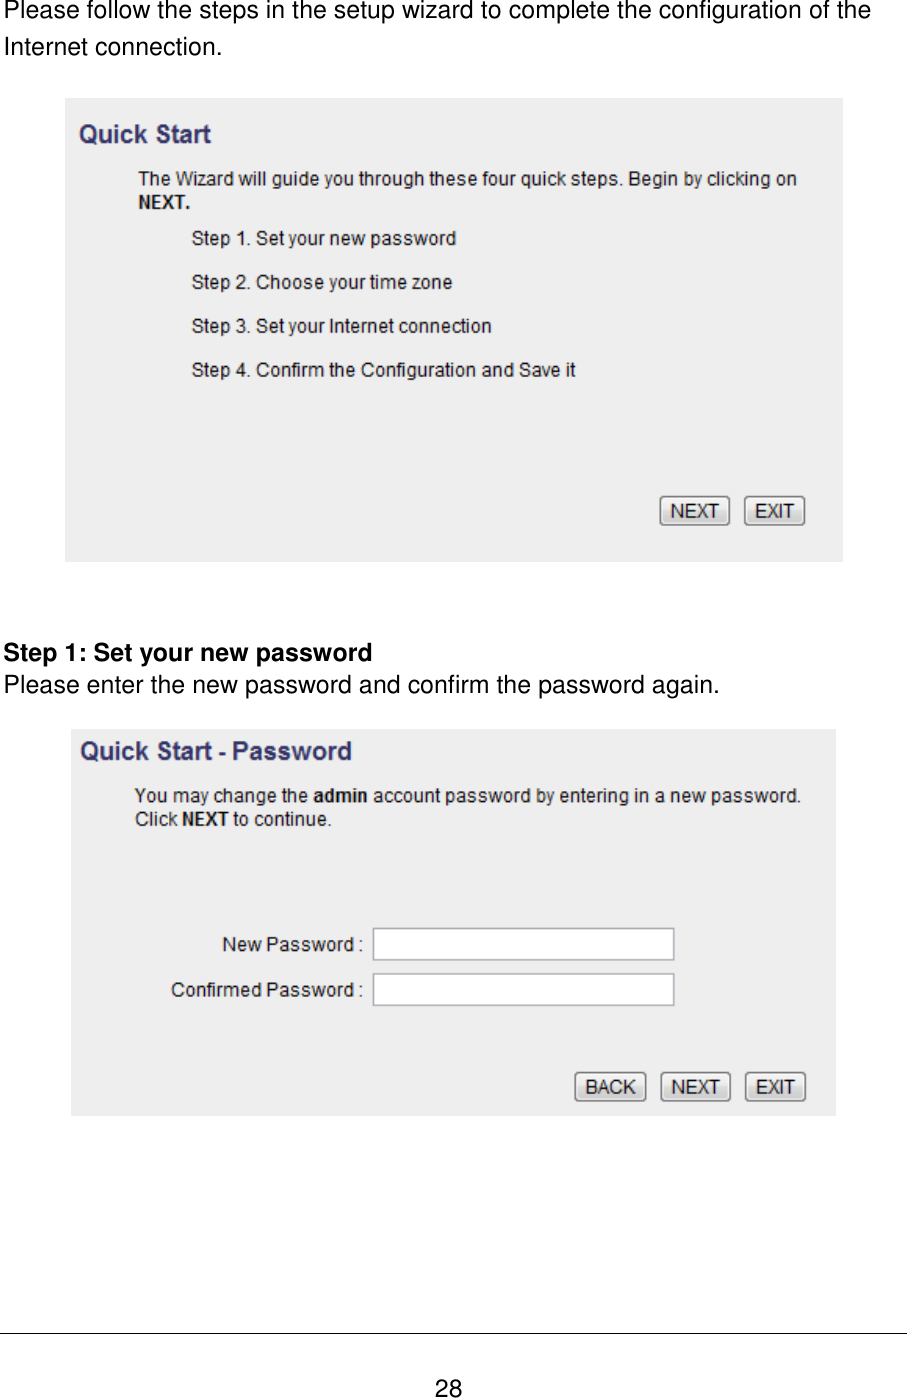   28 Please follow the steps in the setup wizard to complete the configuration of the Internet connection.     Step 1: Set your new password Please enter the new password and confirm the password again.         